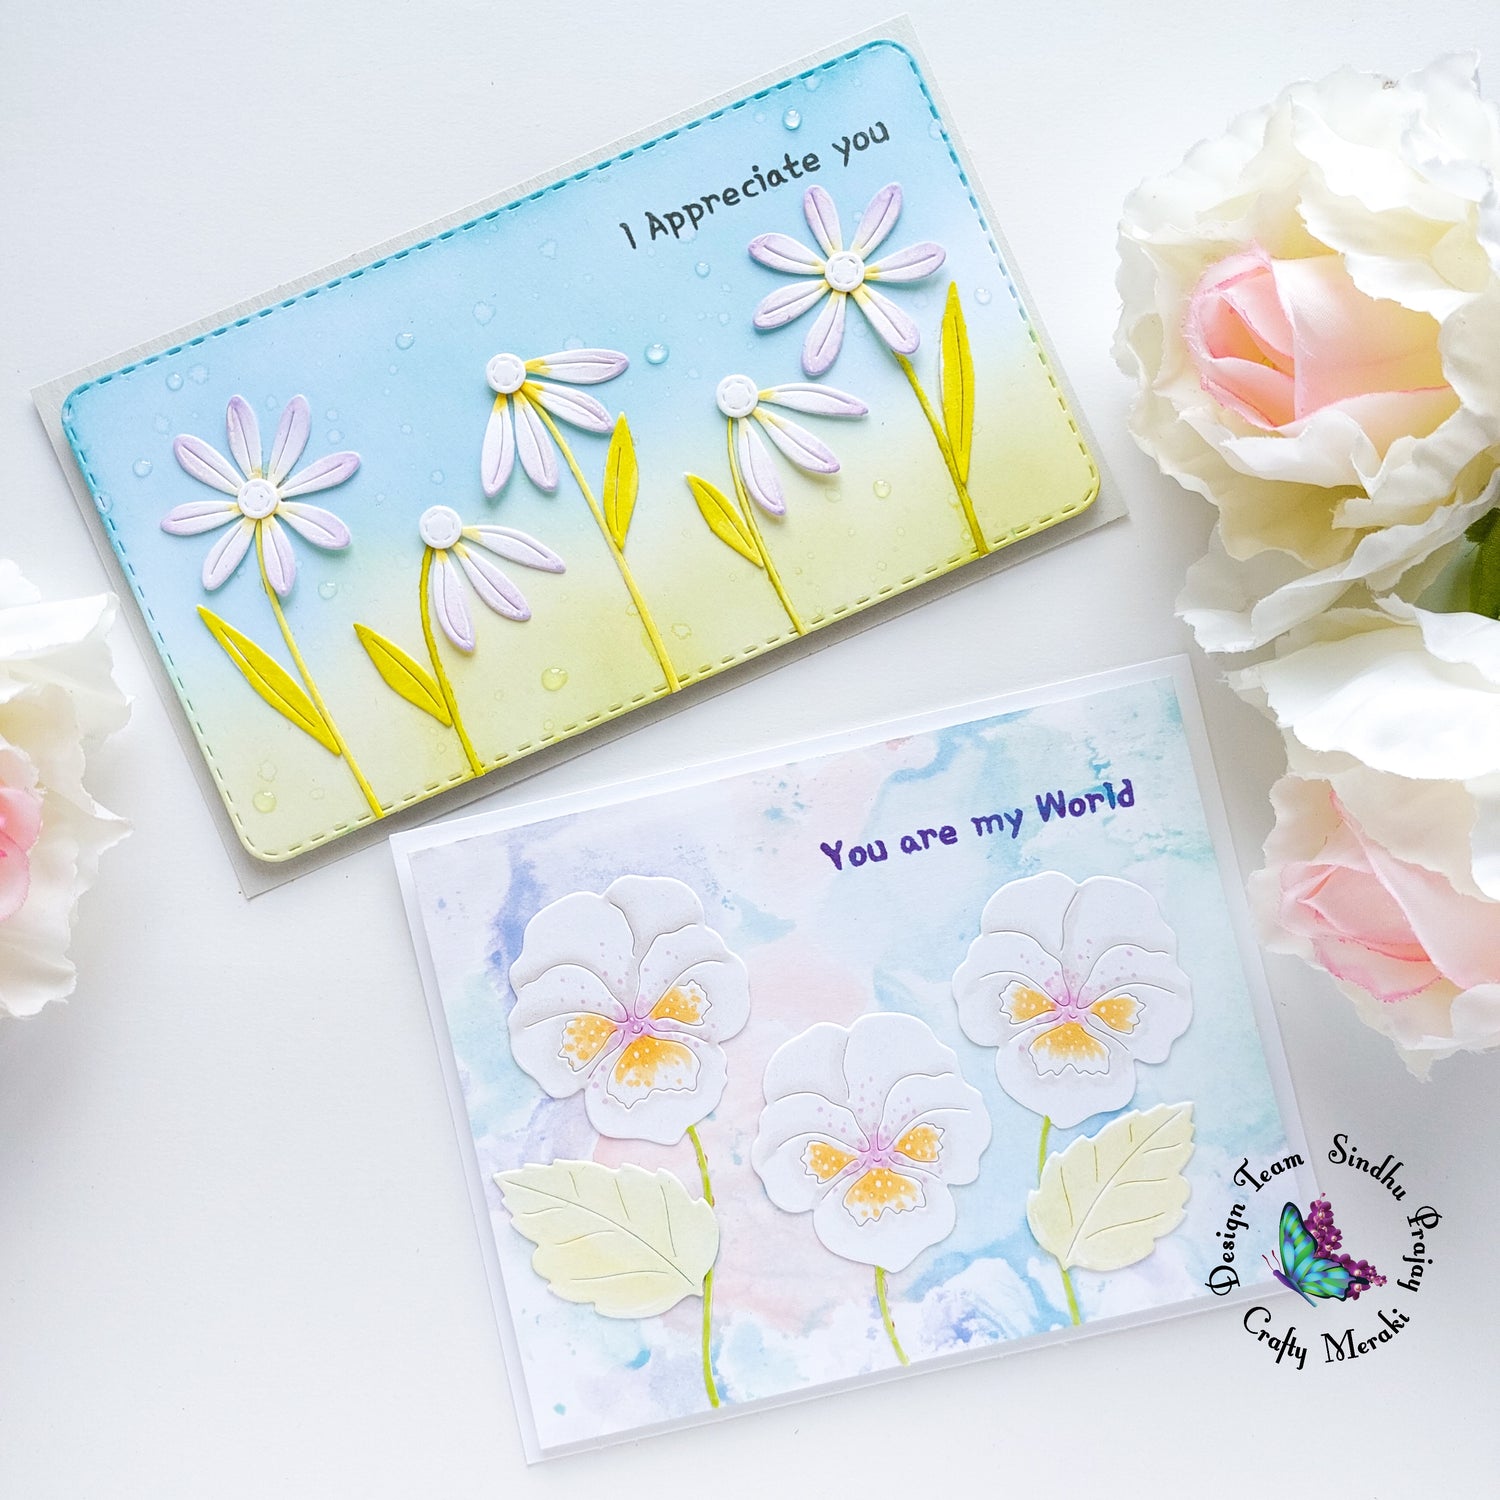 Floral cards by Sindhu